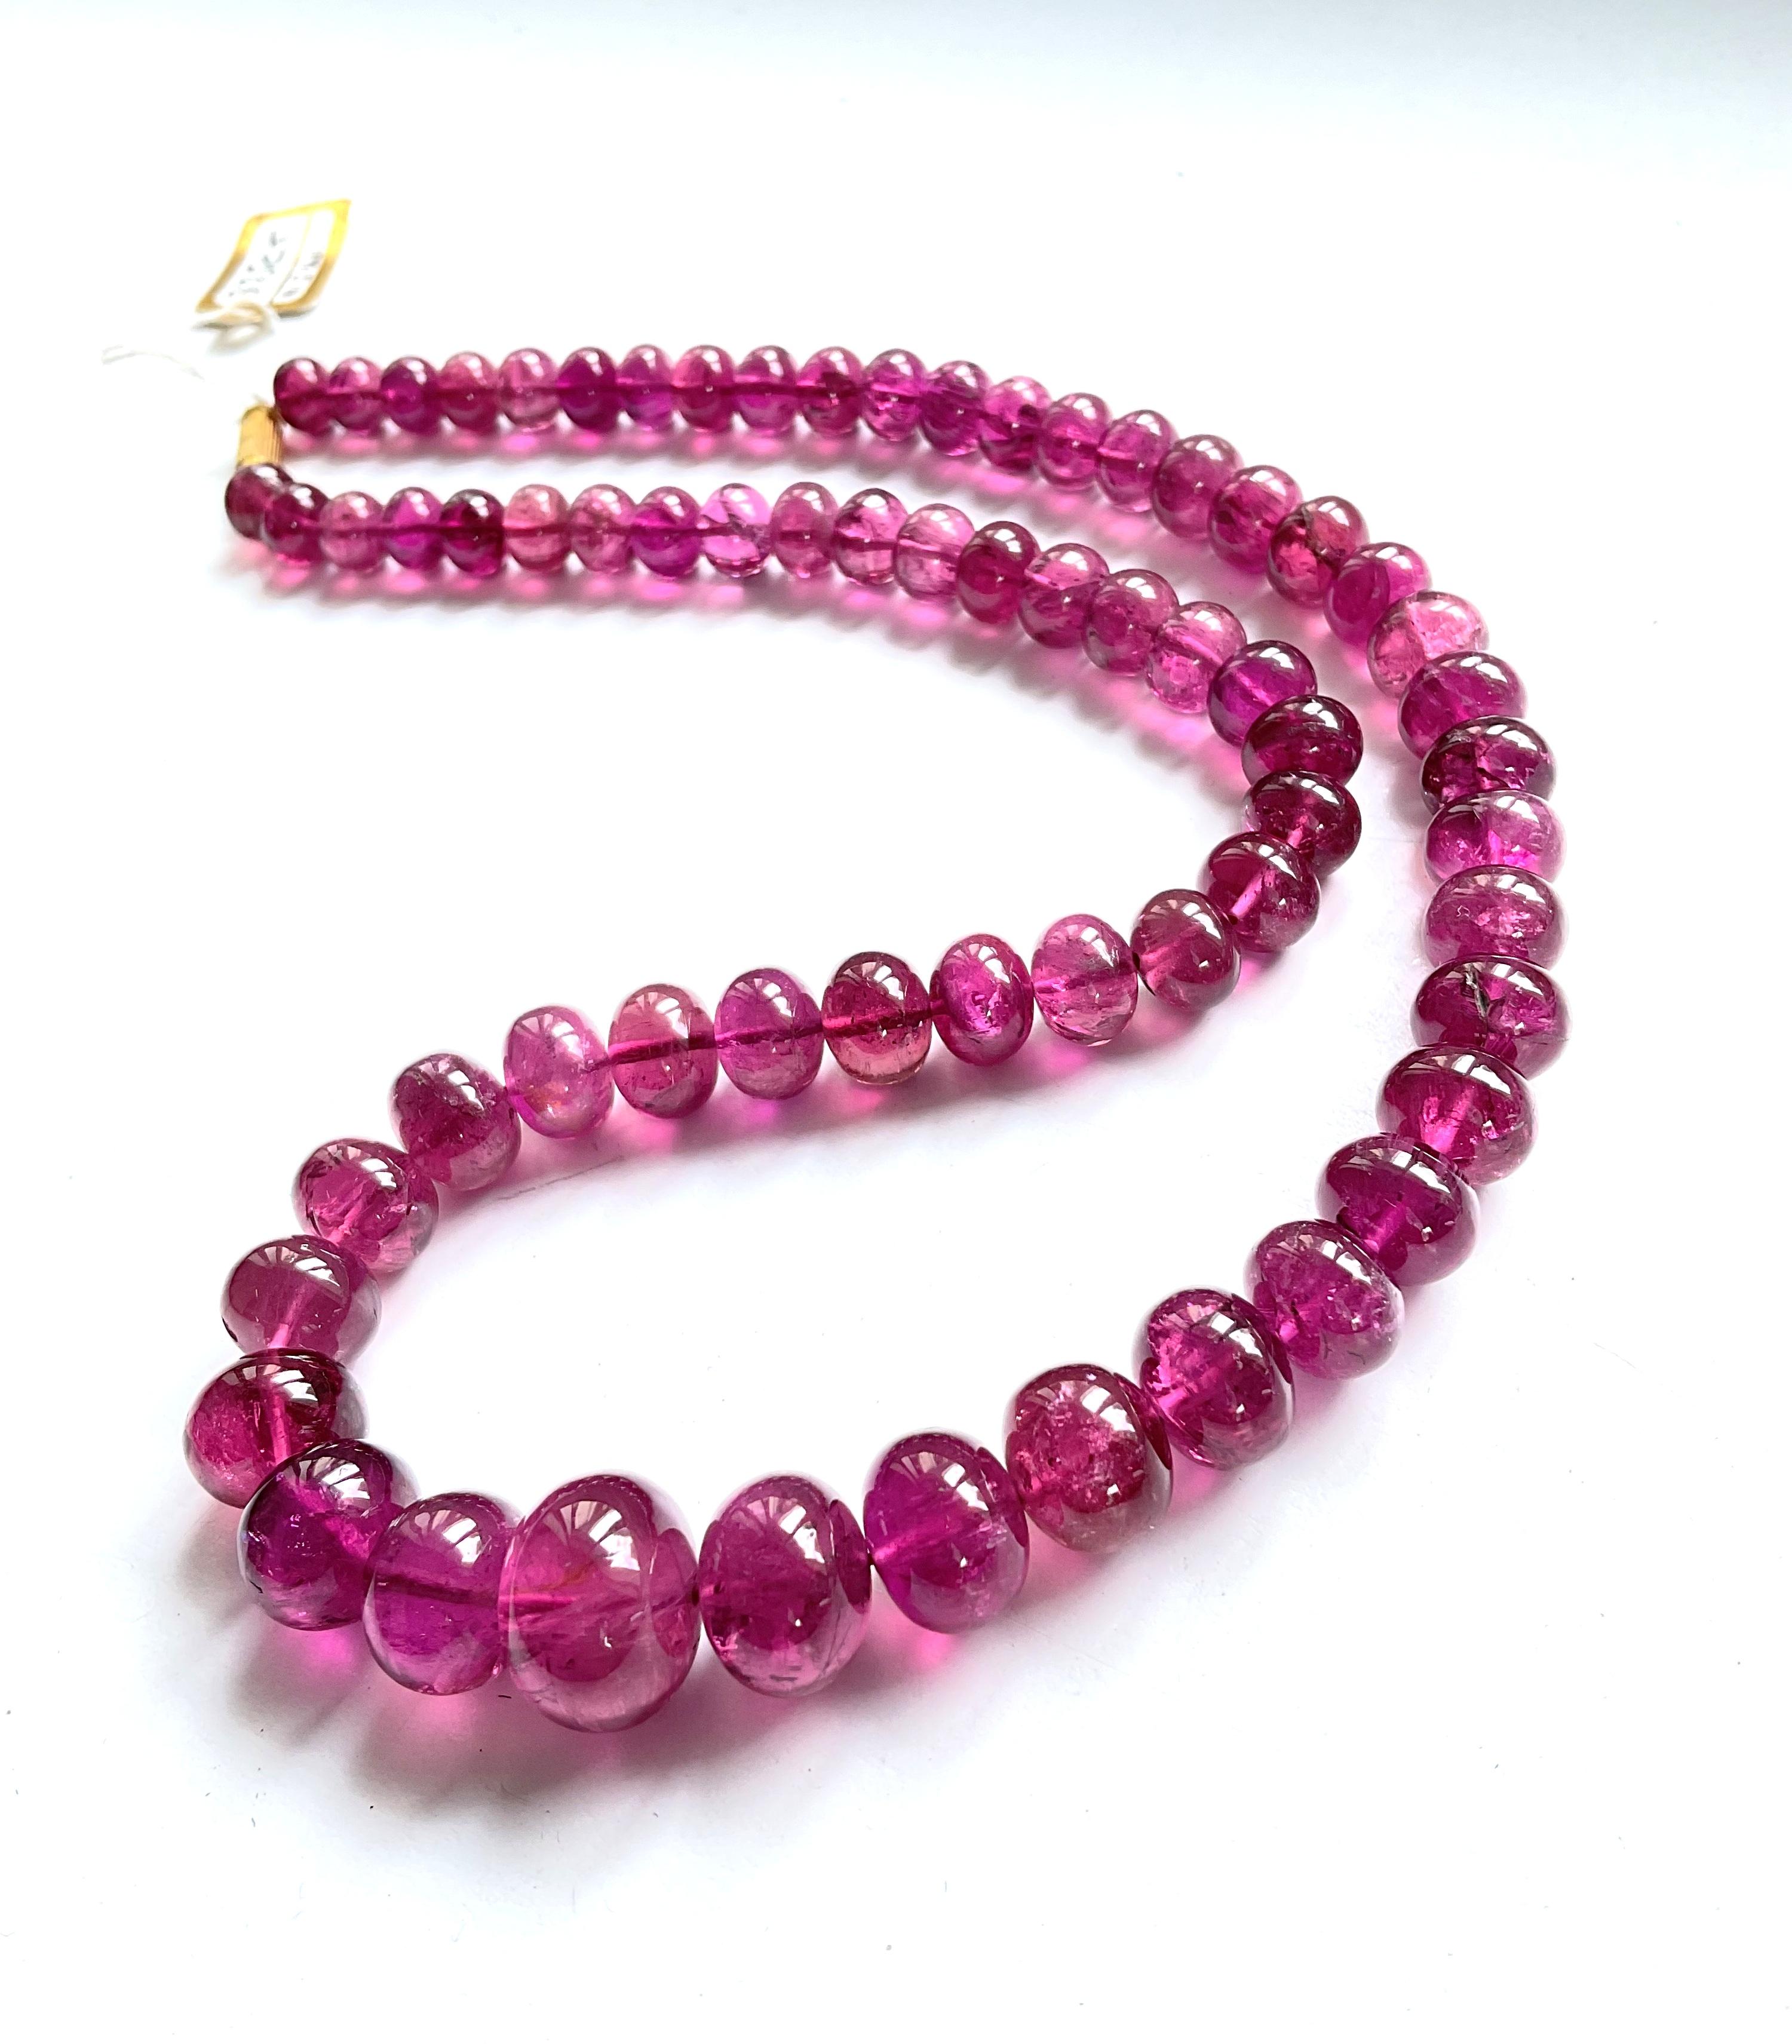 335.01 Carats Top Quality Rubellite Tourmaline Beads Natural Gemstones necklace For Sale